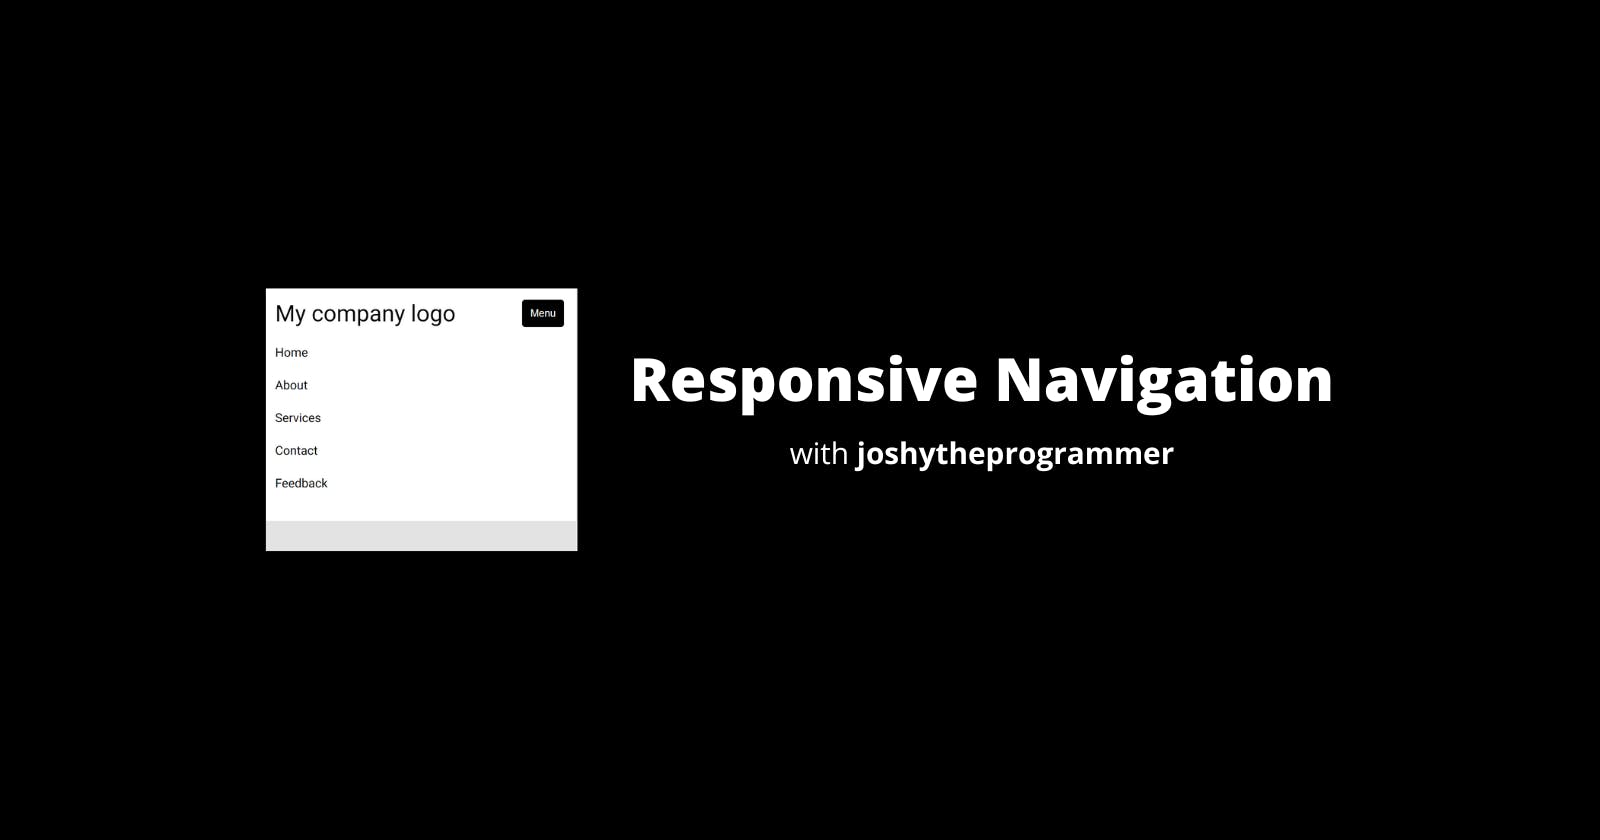 How to build a responsive navigation bar using just HTML and CSS.